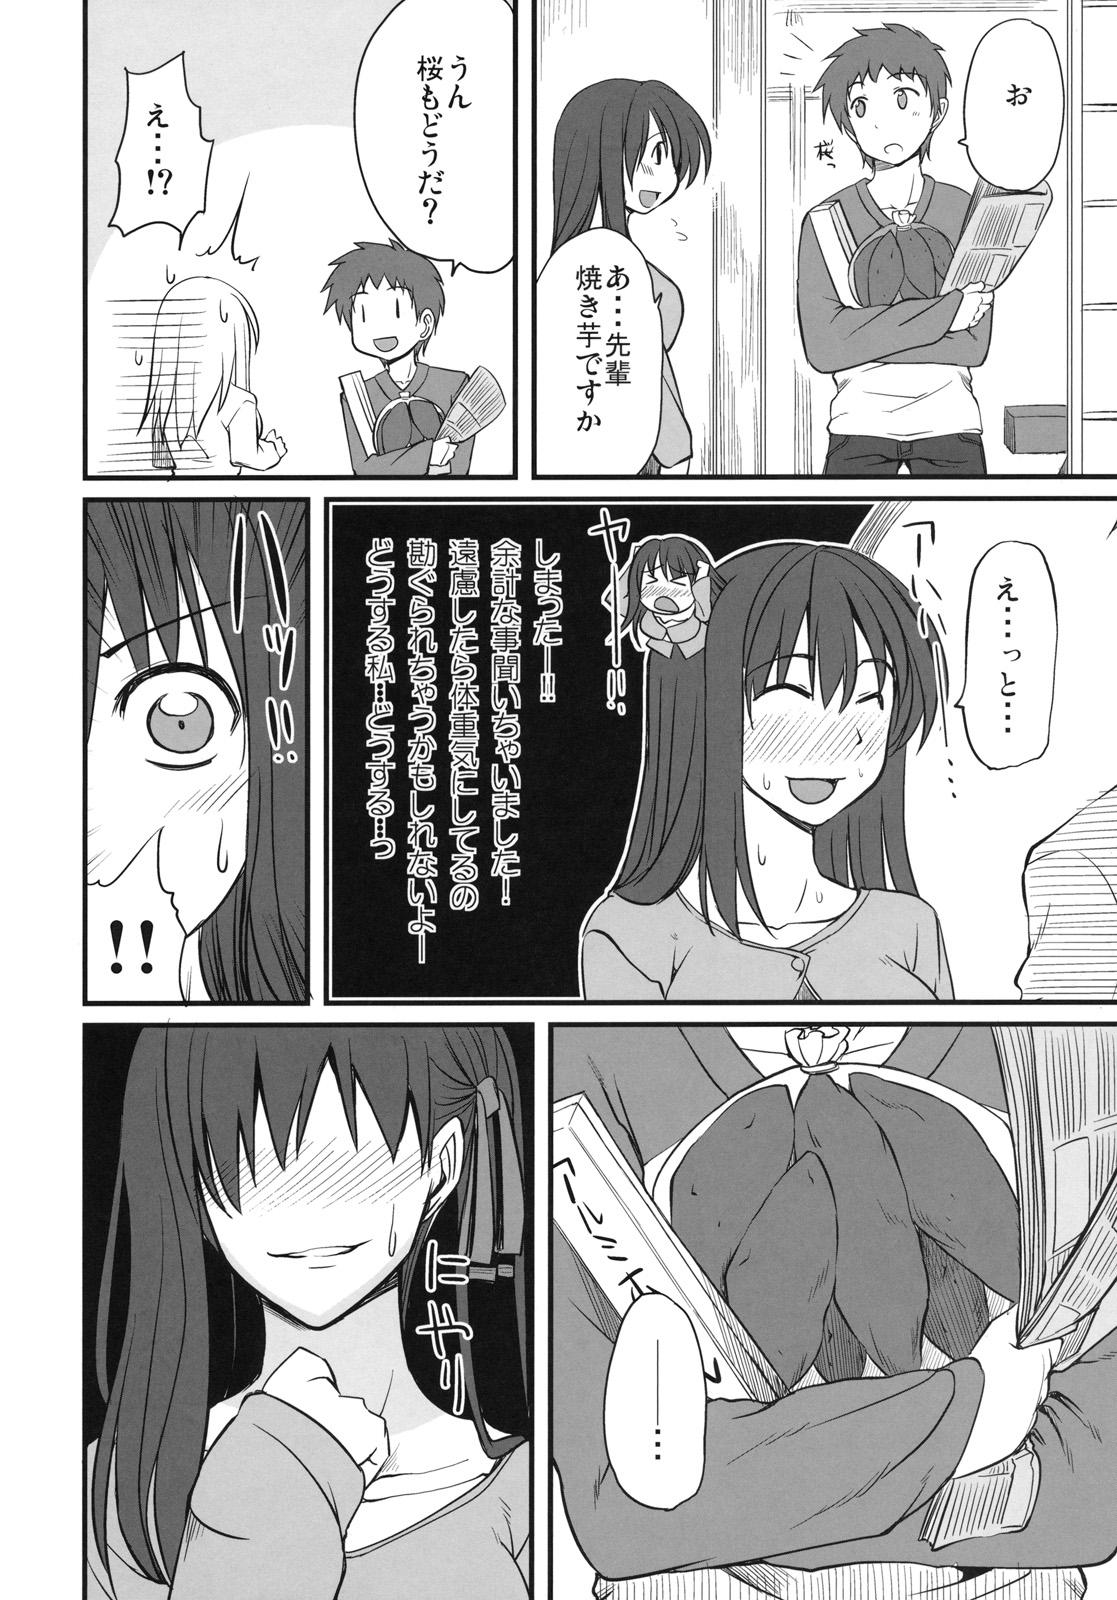 Thuylinh One Day! vol. 17 - Fate stay night Sextape - Page 7